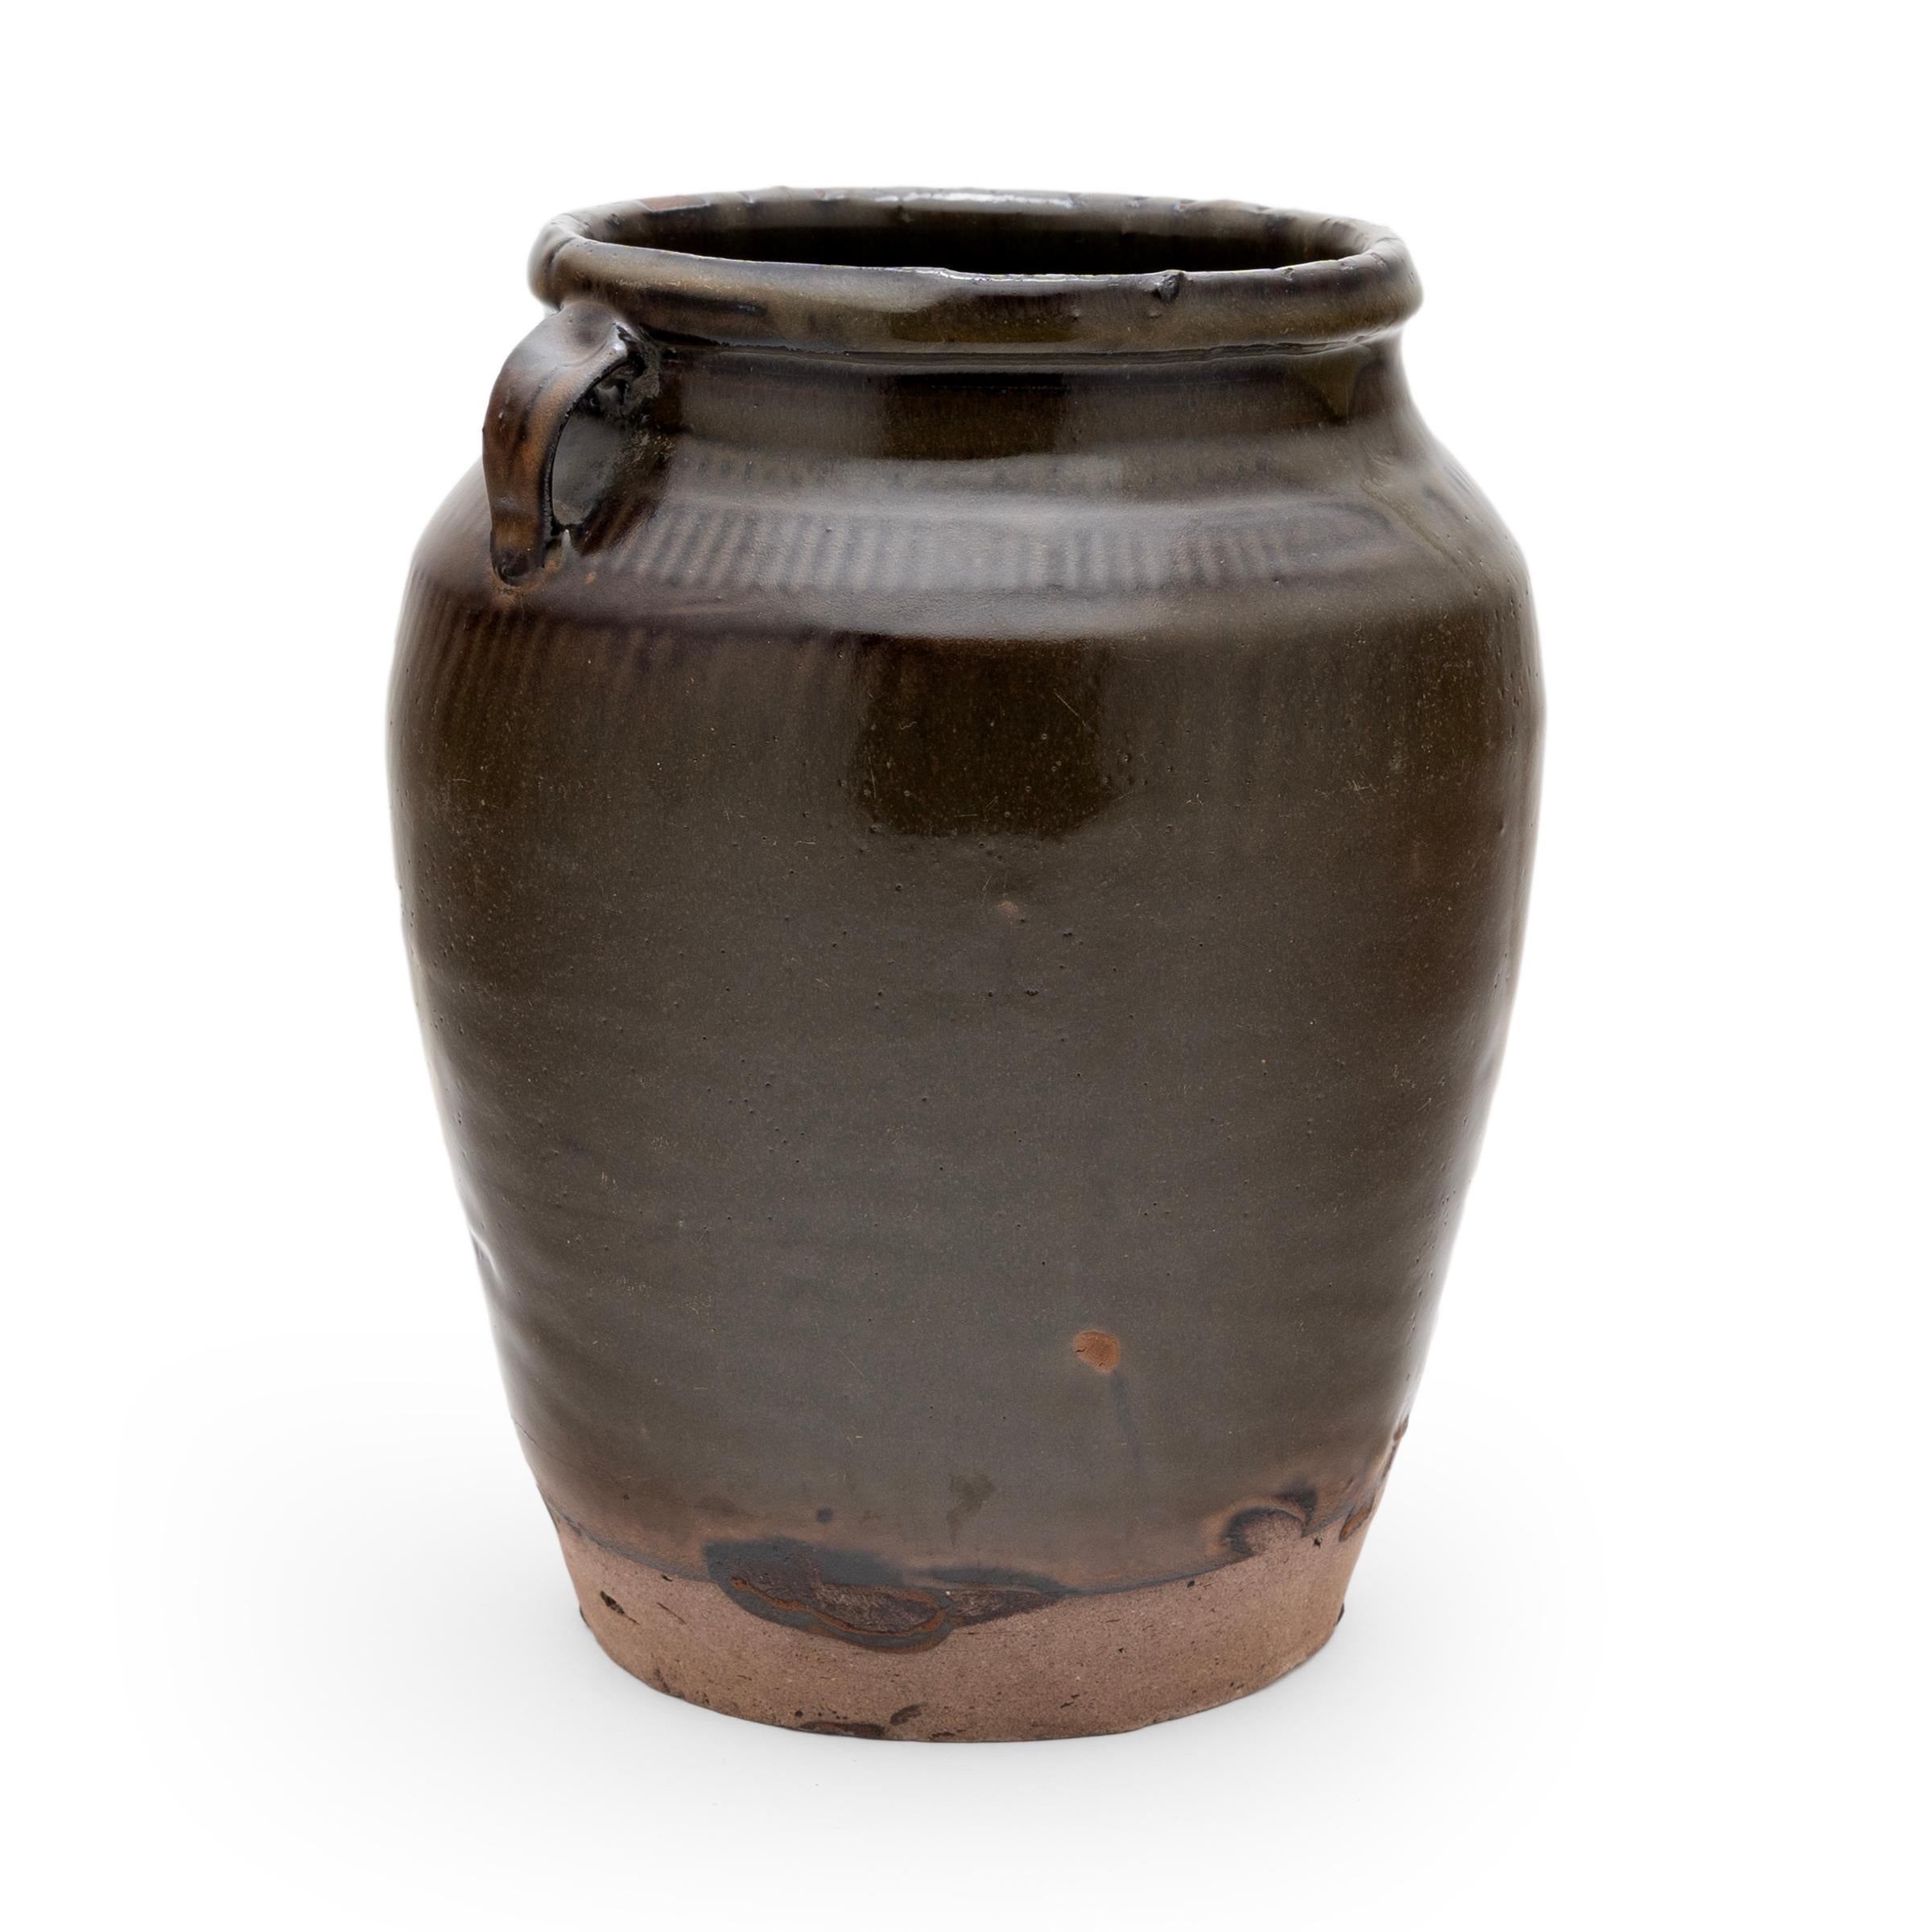 Originally used to store foods or pickle vegetables in a provincial Chinese kitchen, this late 19th-century ceramic jar is coated inside and out with a richly-colored matte brown glaze. The thick glaze drips down the sides, allowing the ripples of